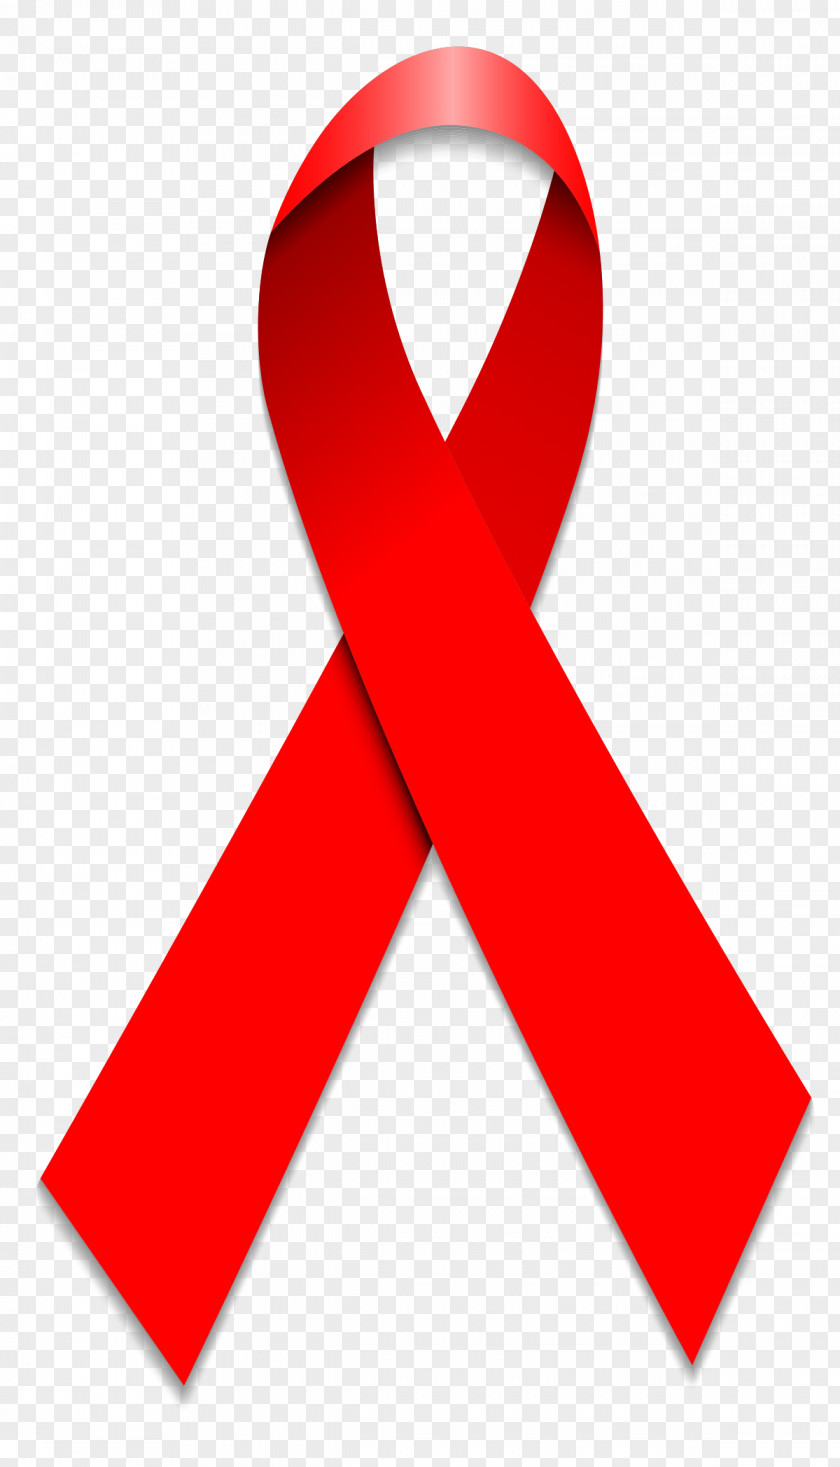 Cancer World AIDS Day Red Ribbon HIV-positive People Management Of HIV/AIDS PNG